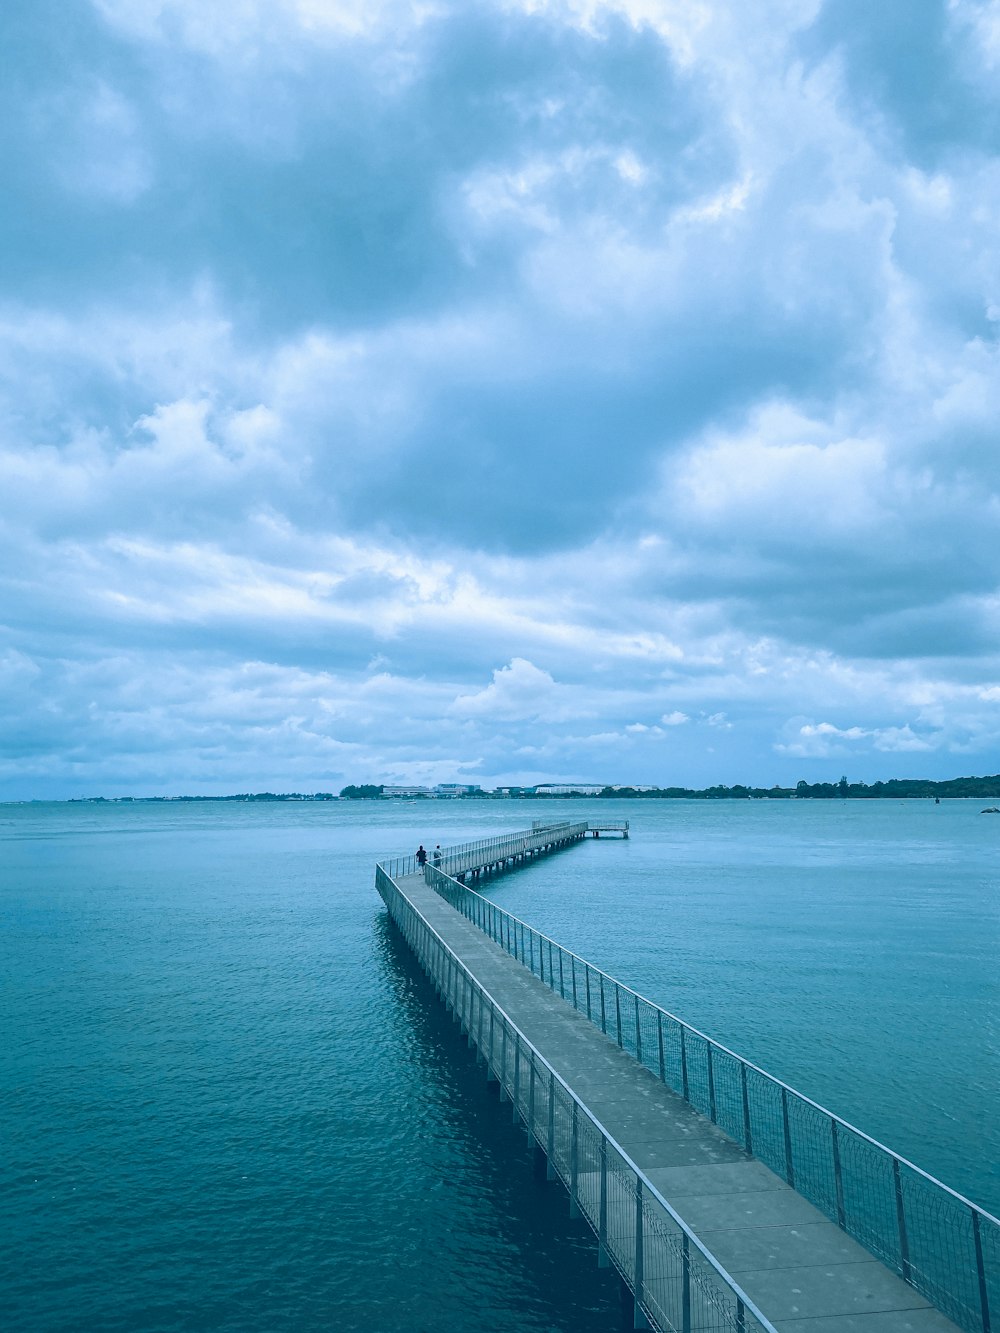 gray concrete dock under cloudy sky during daytime